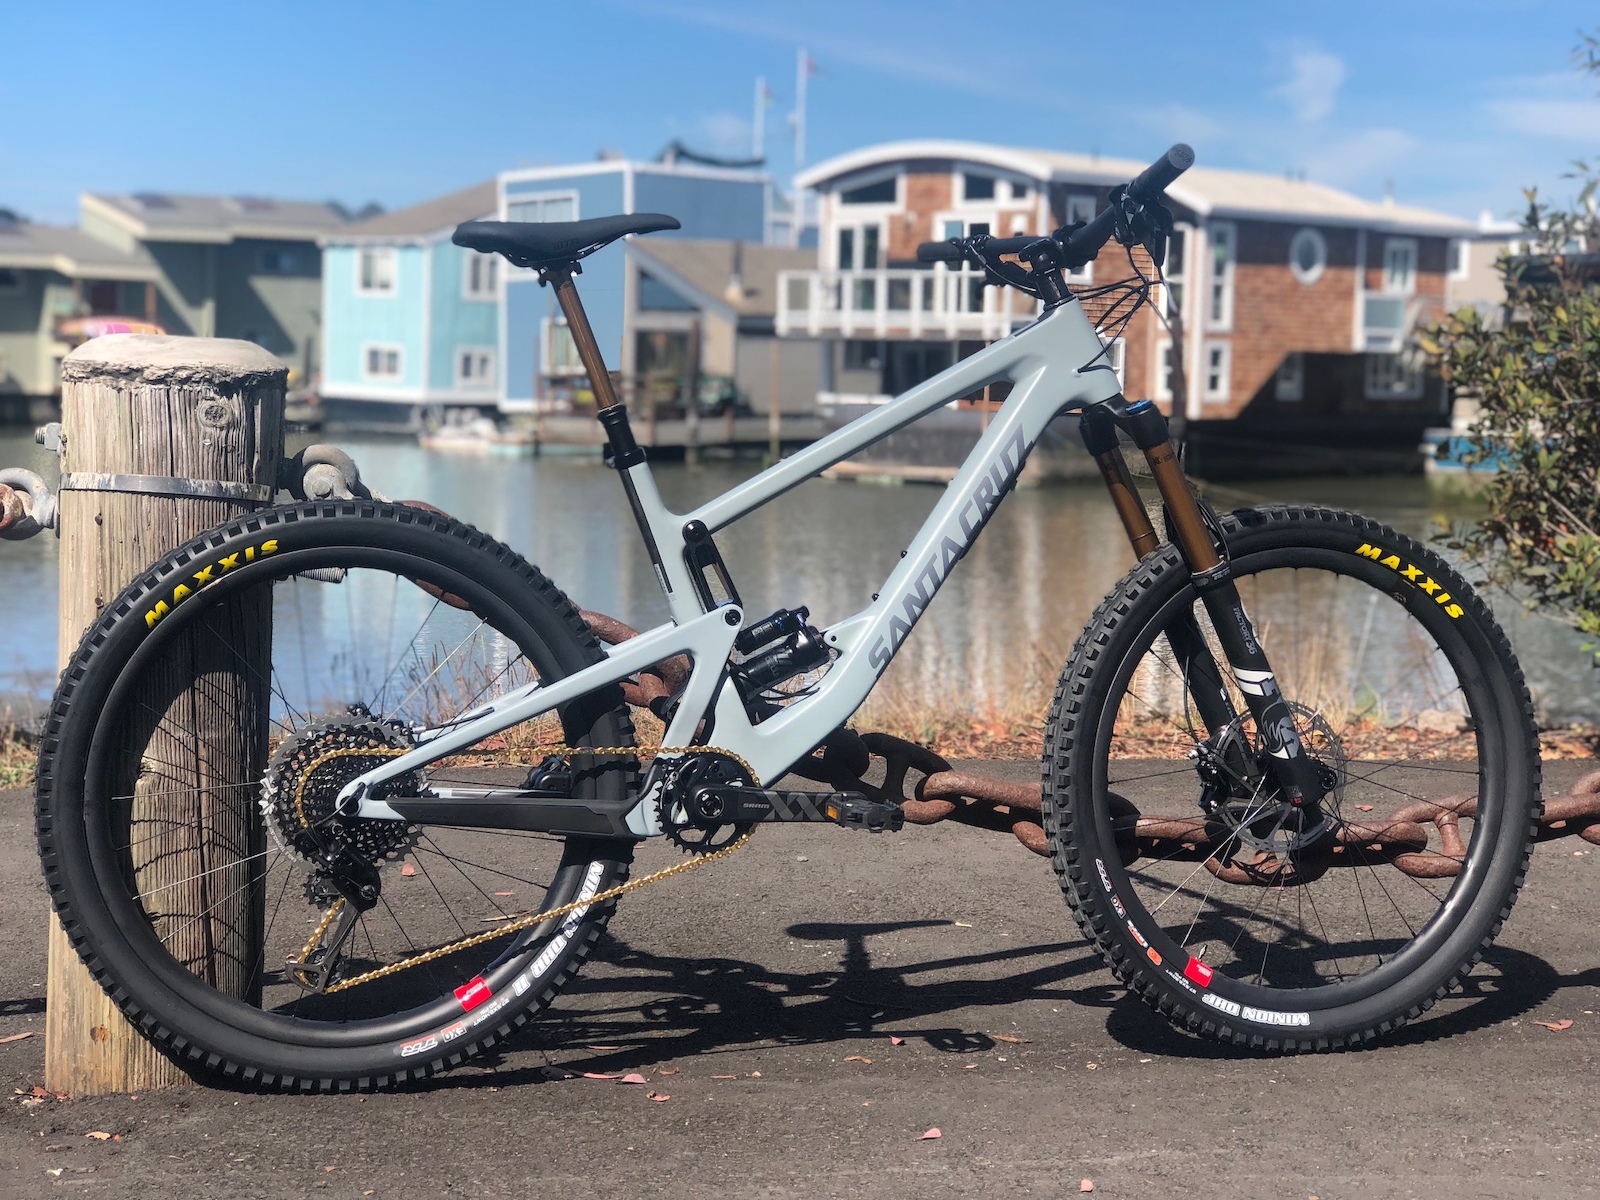 2019 Bronson CC XX1 Reserve/I9 with Transfer and XX1 gold chain added on.